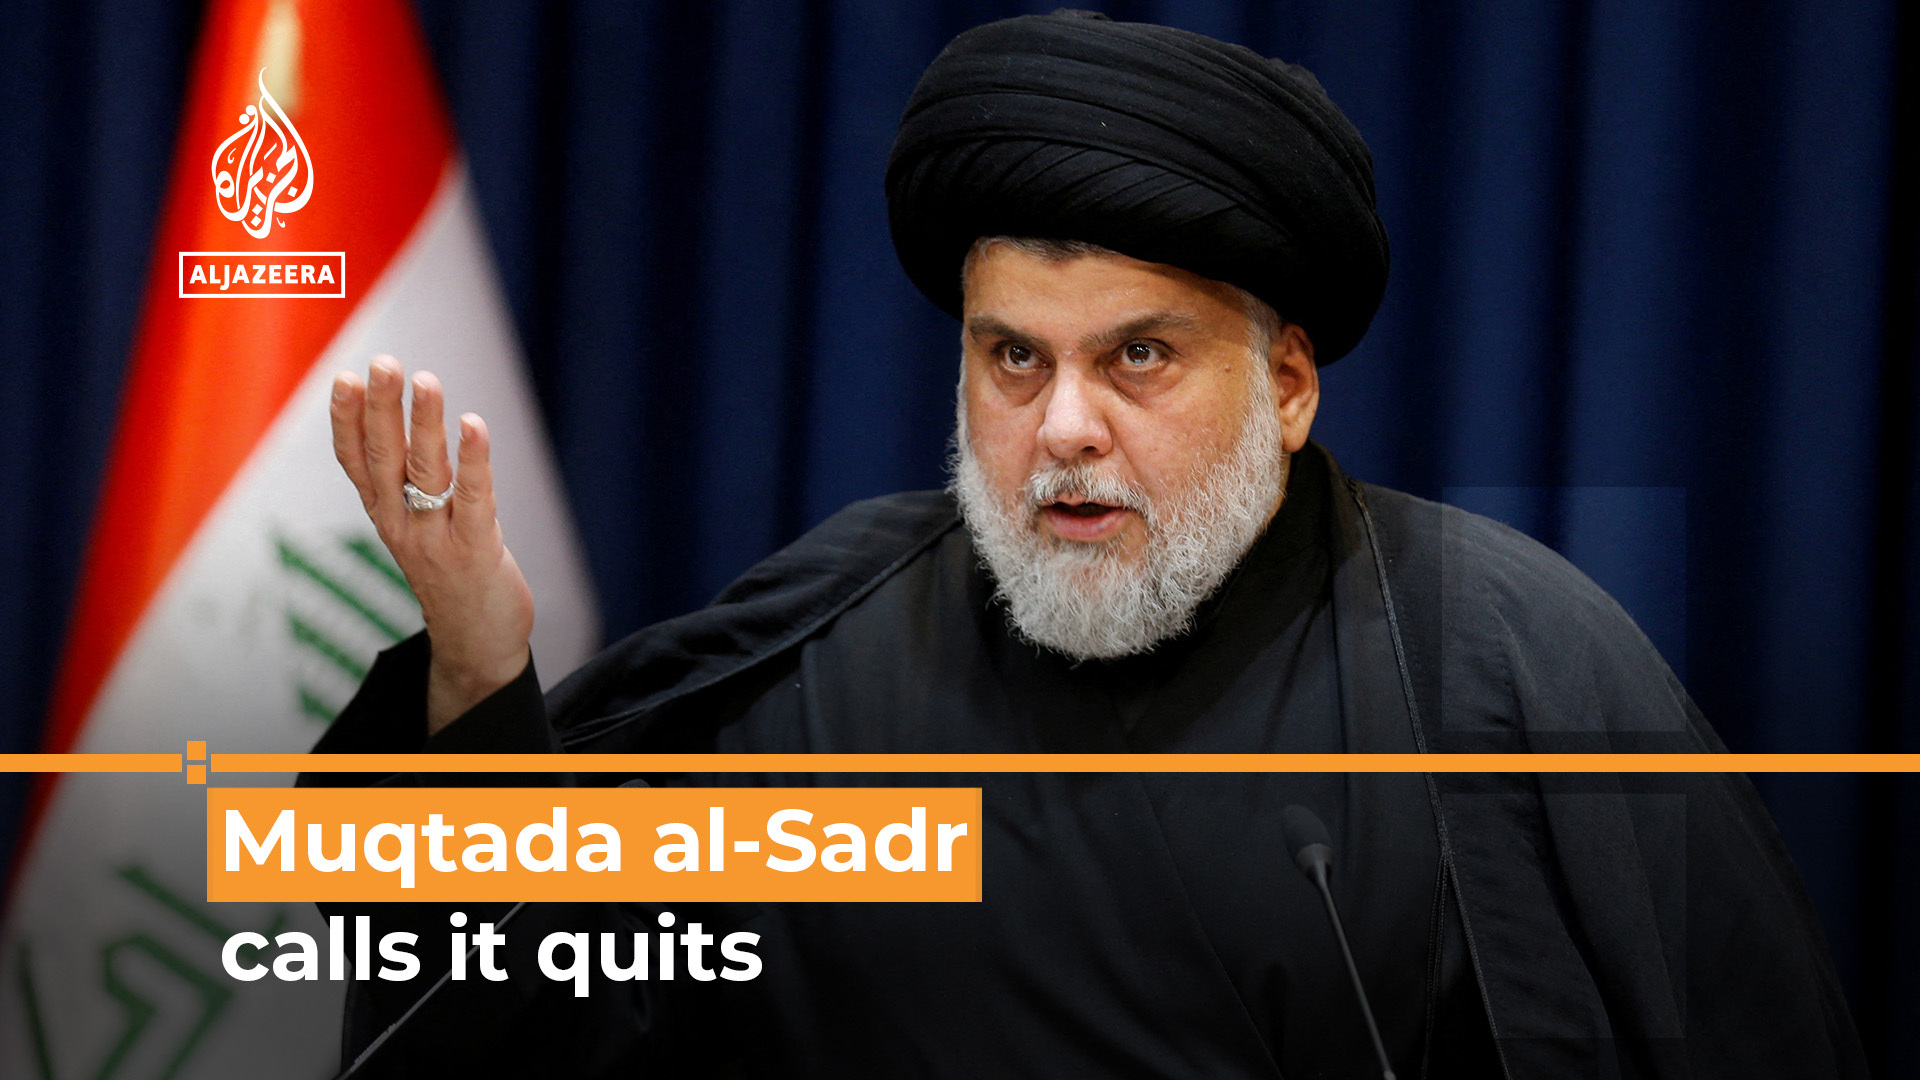 Iraq chaos as al-Sadr supporters storm Green Zone after he quits